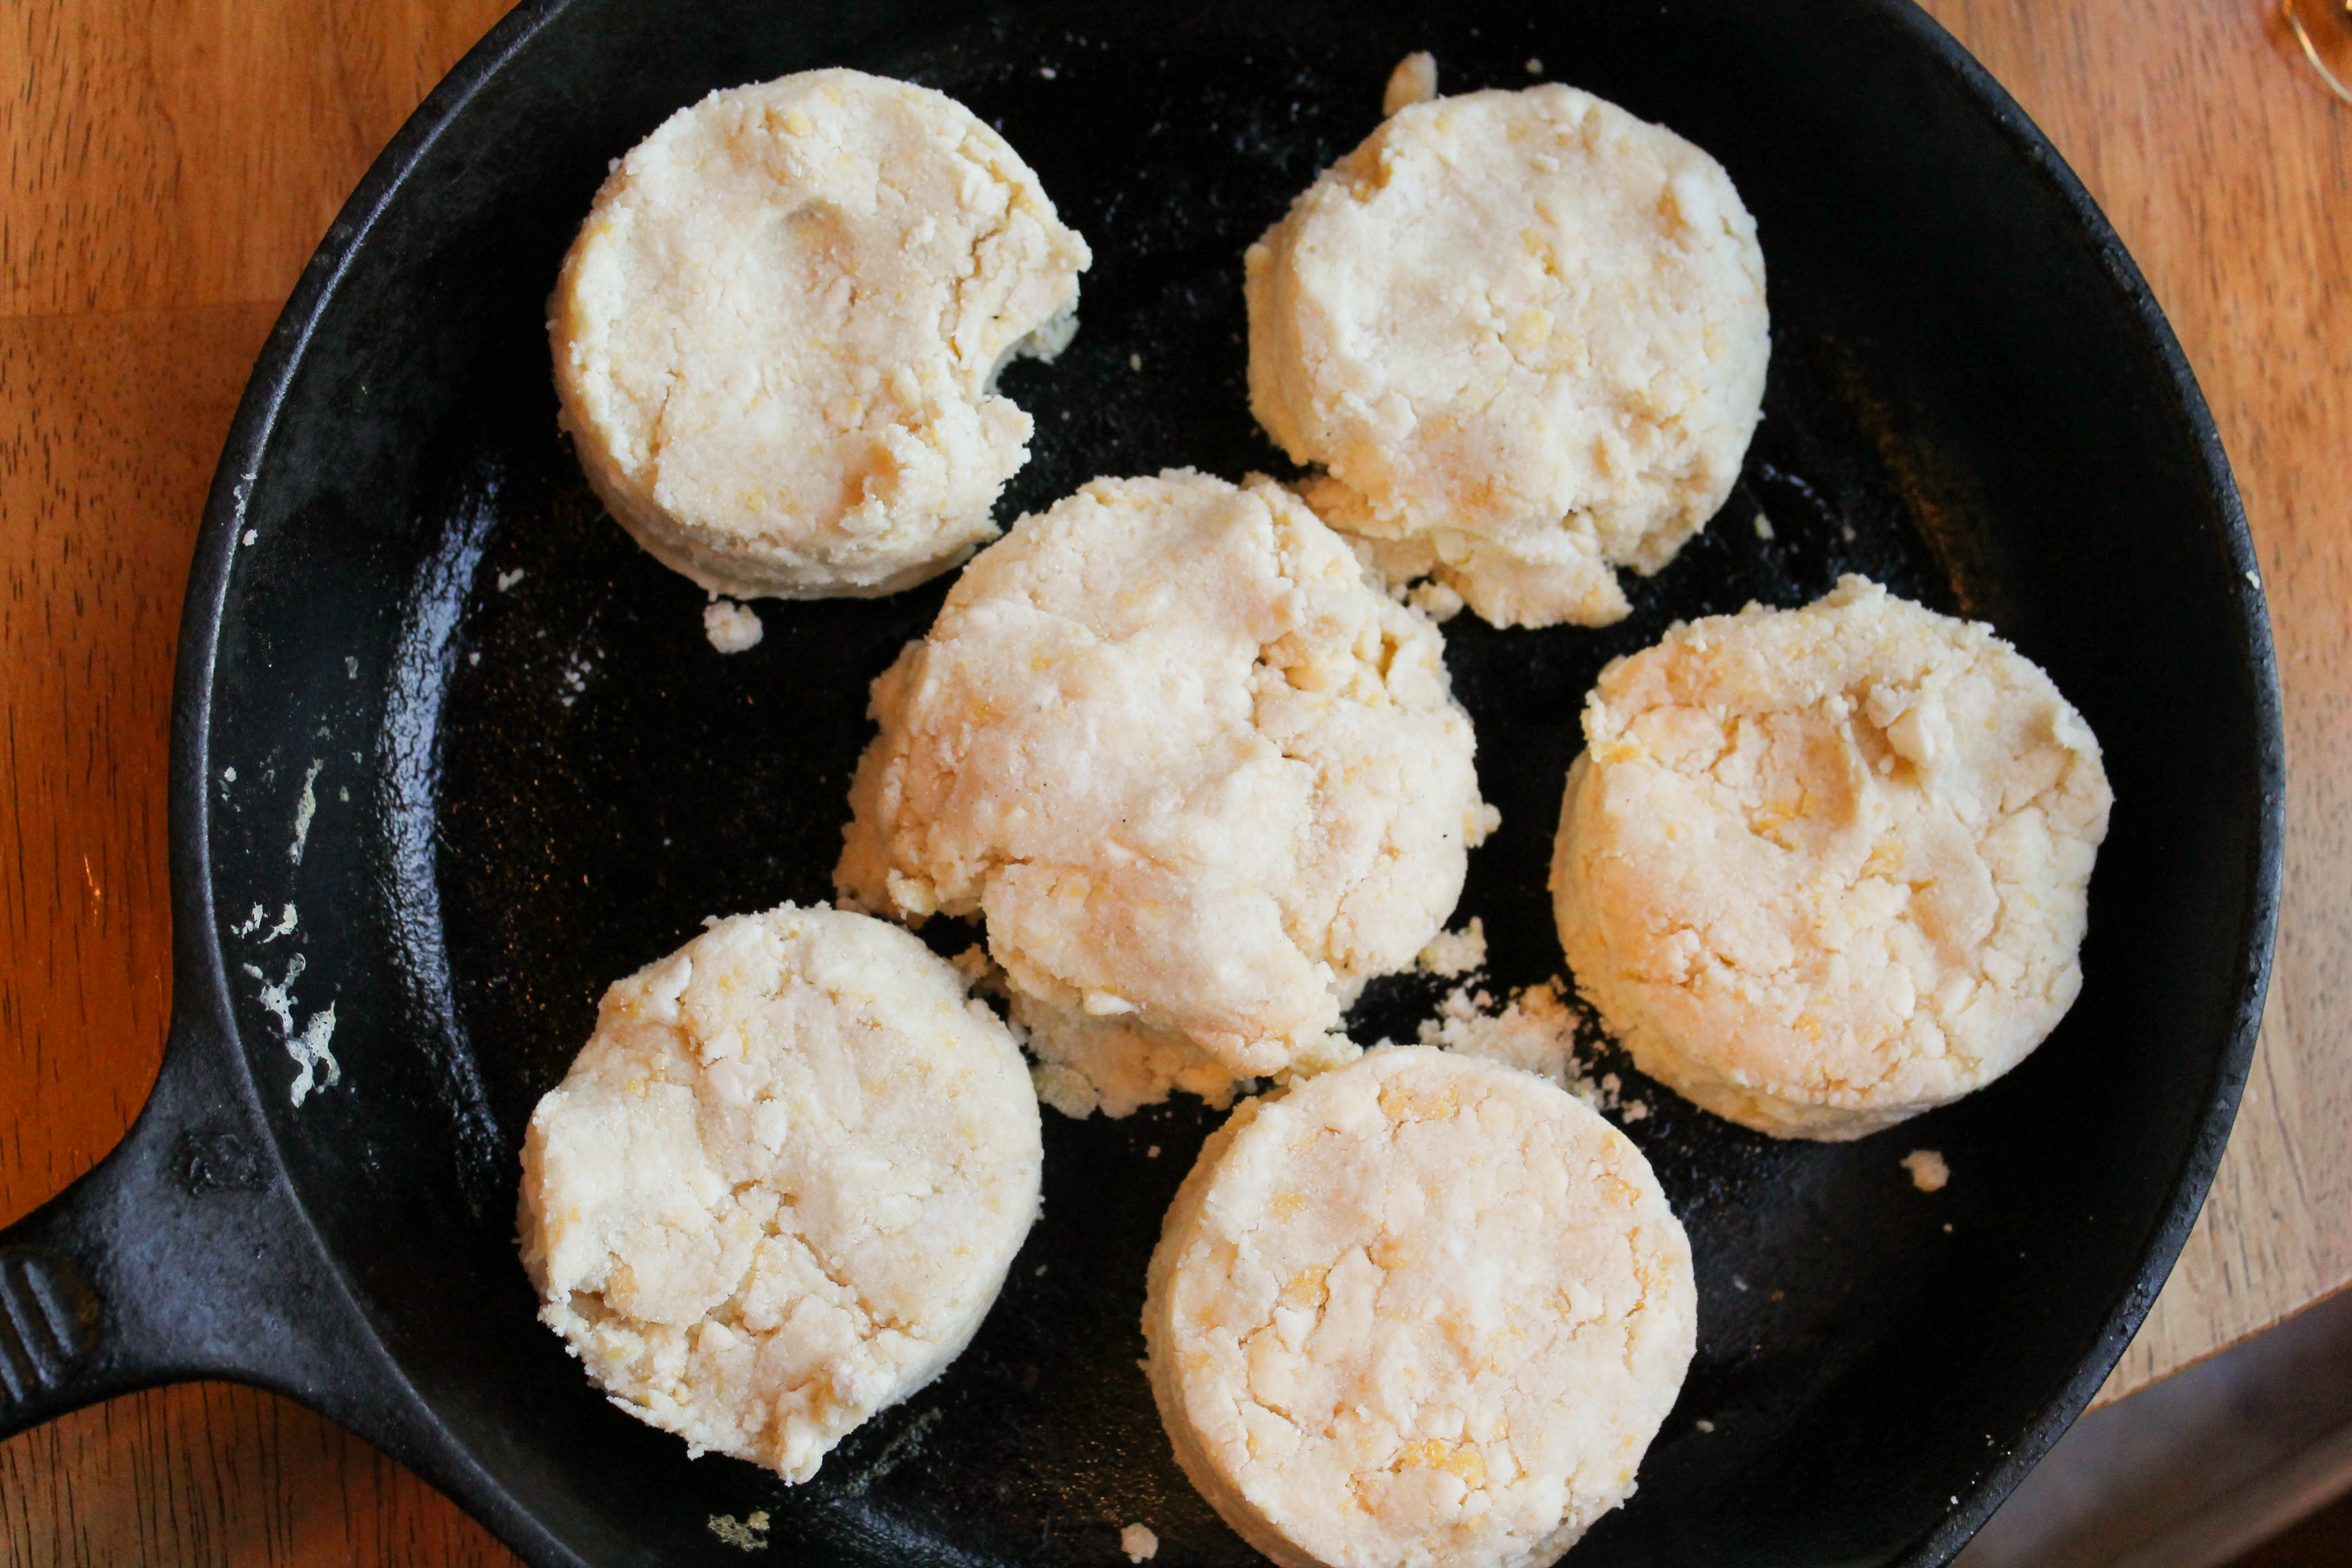 Delicious & Flaky Cast Iron Biscuits - Come Home with Bonnie Jean